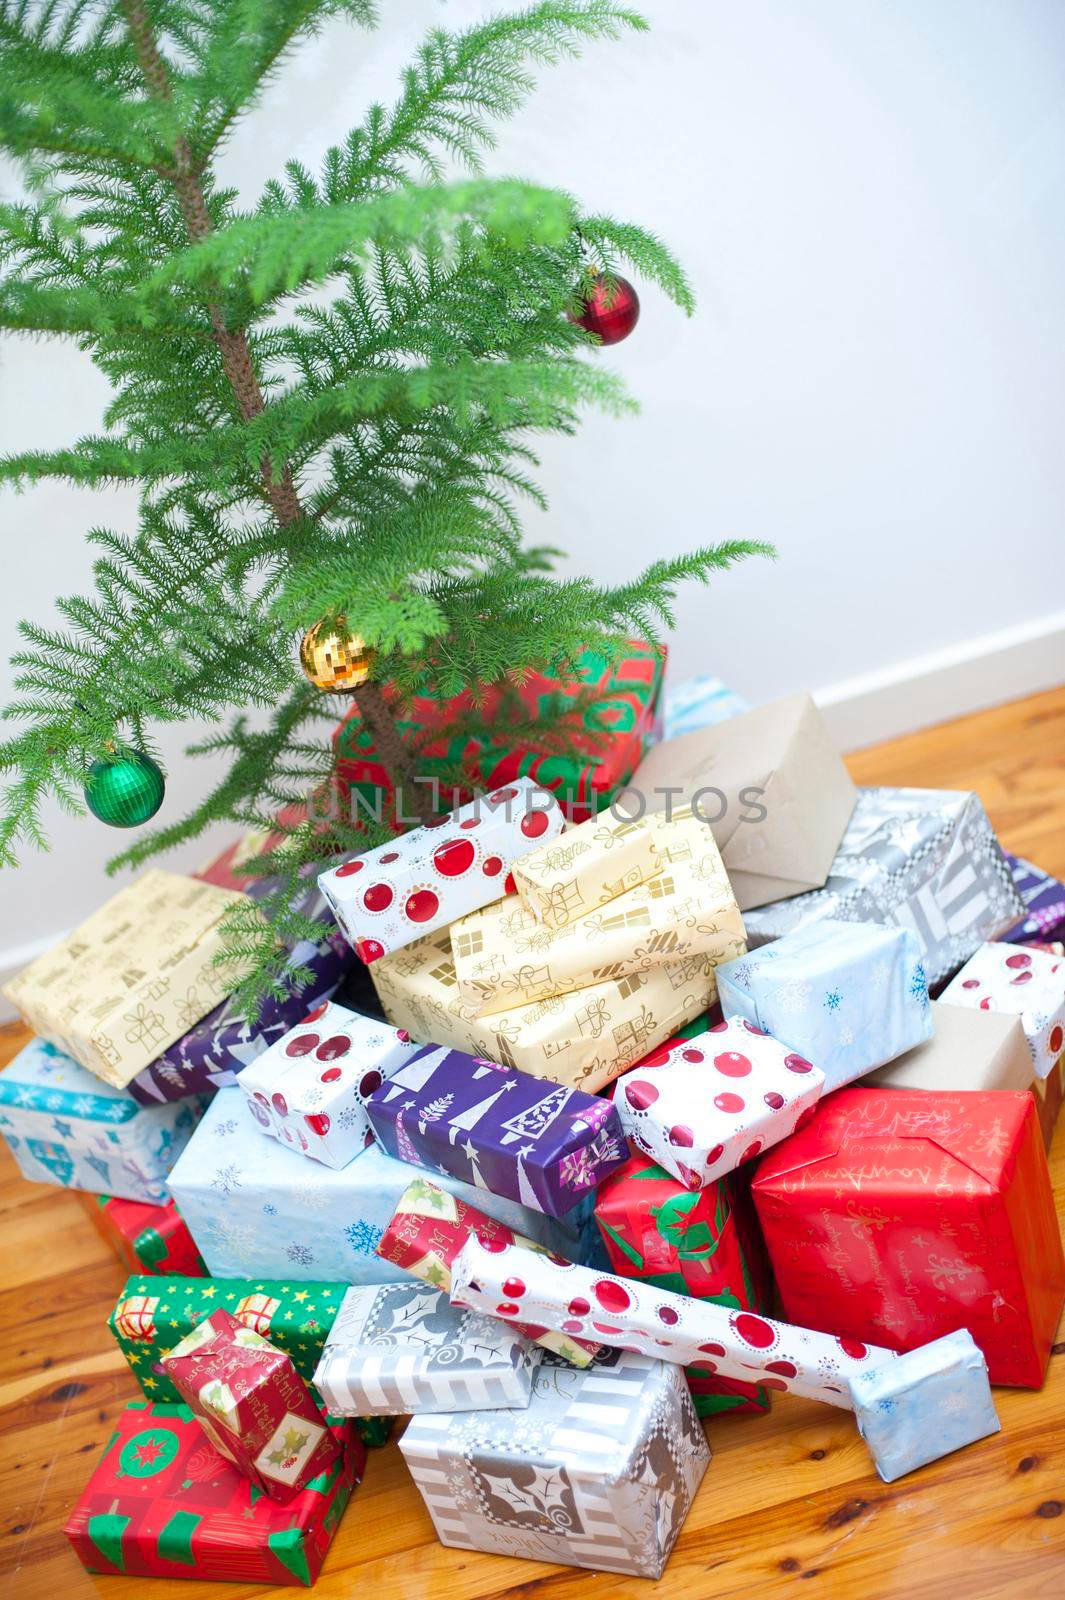 Large collection of colourful gift-wrapped Xmas presents gathered at the foot of the Christmas tree ready for a family celebration